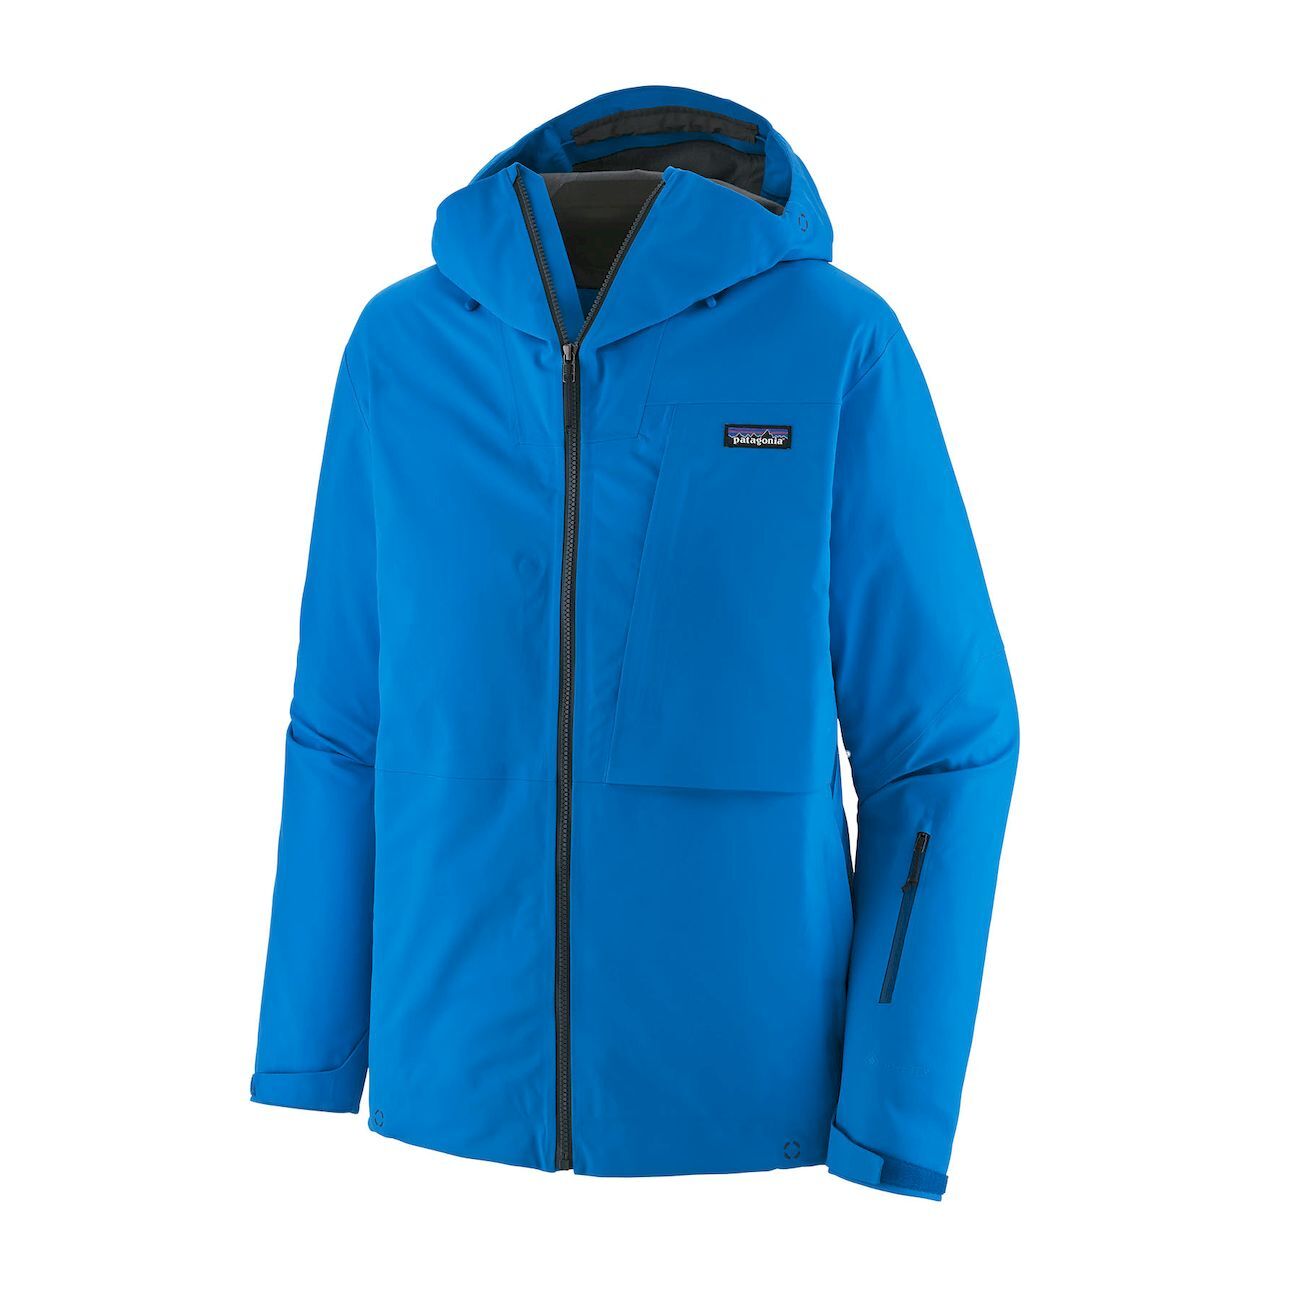 Patagonia Untracked Jkt - Insulated jacket -Men's